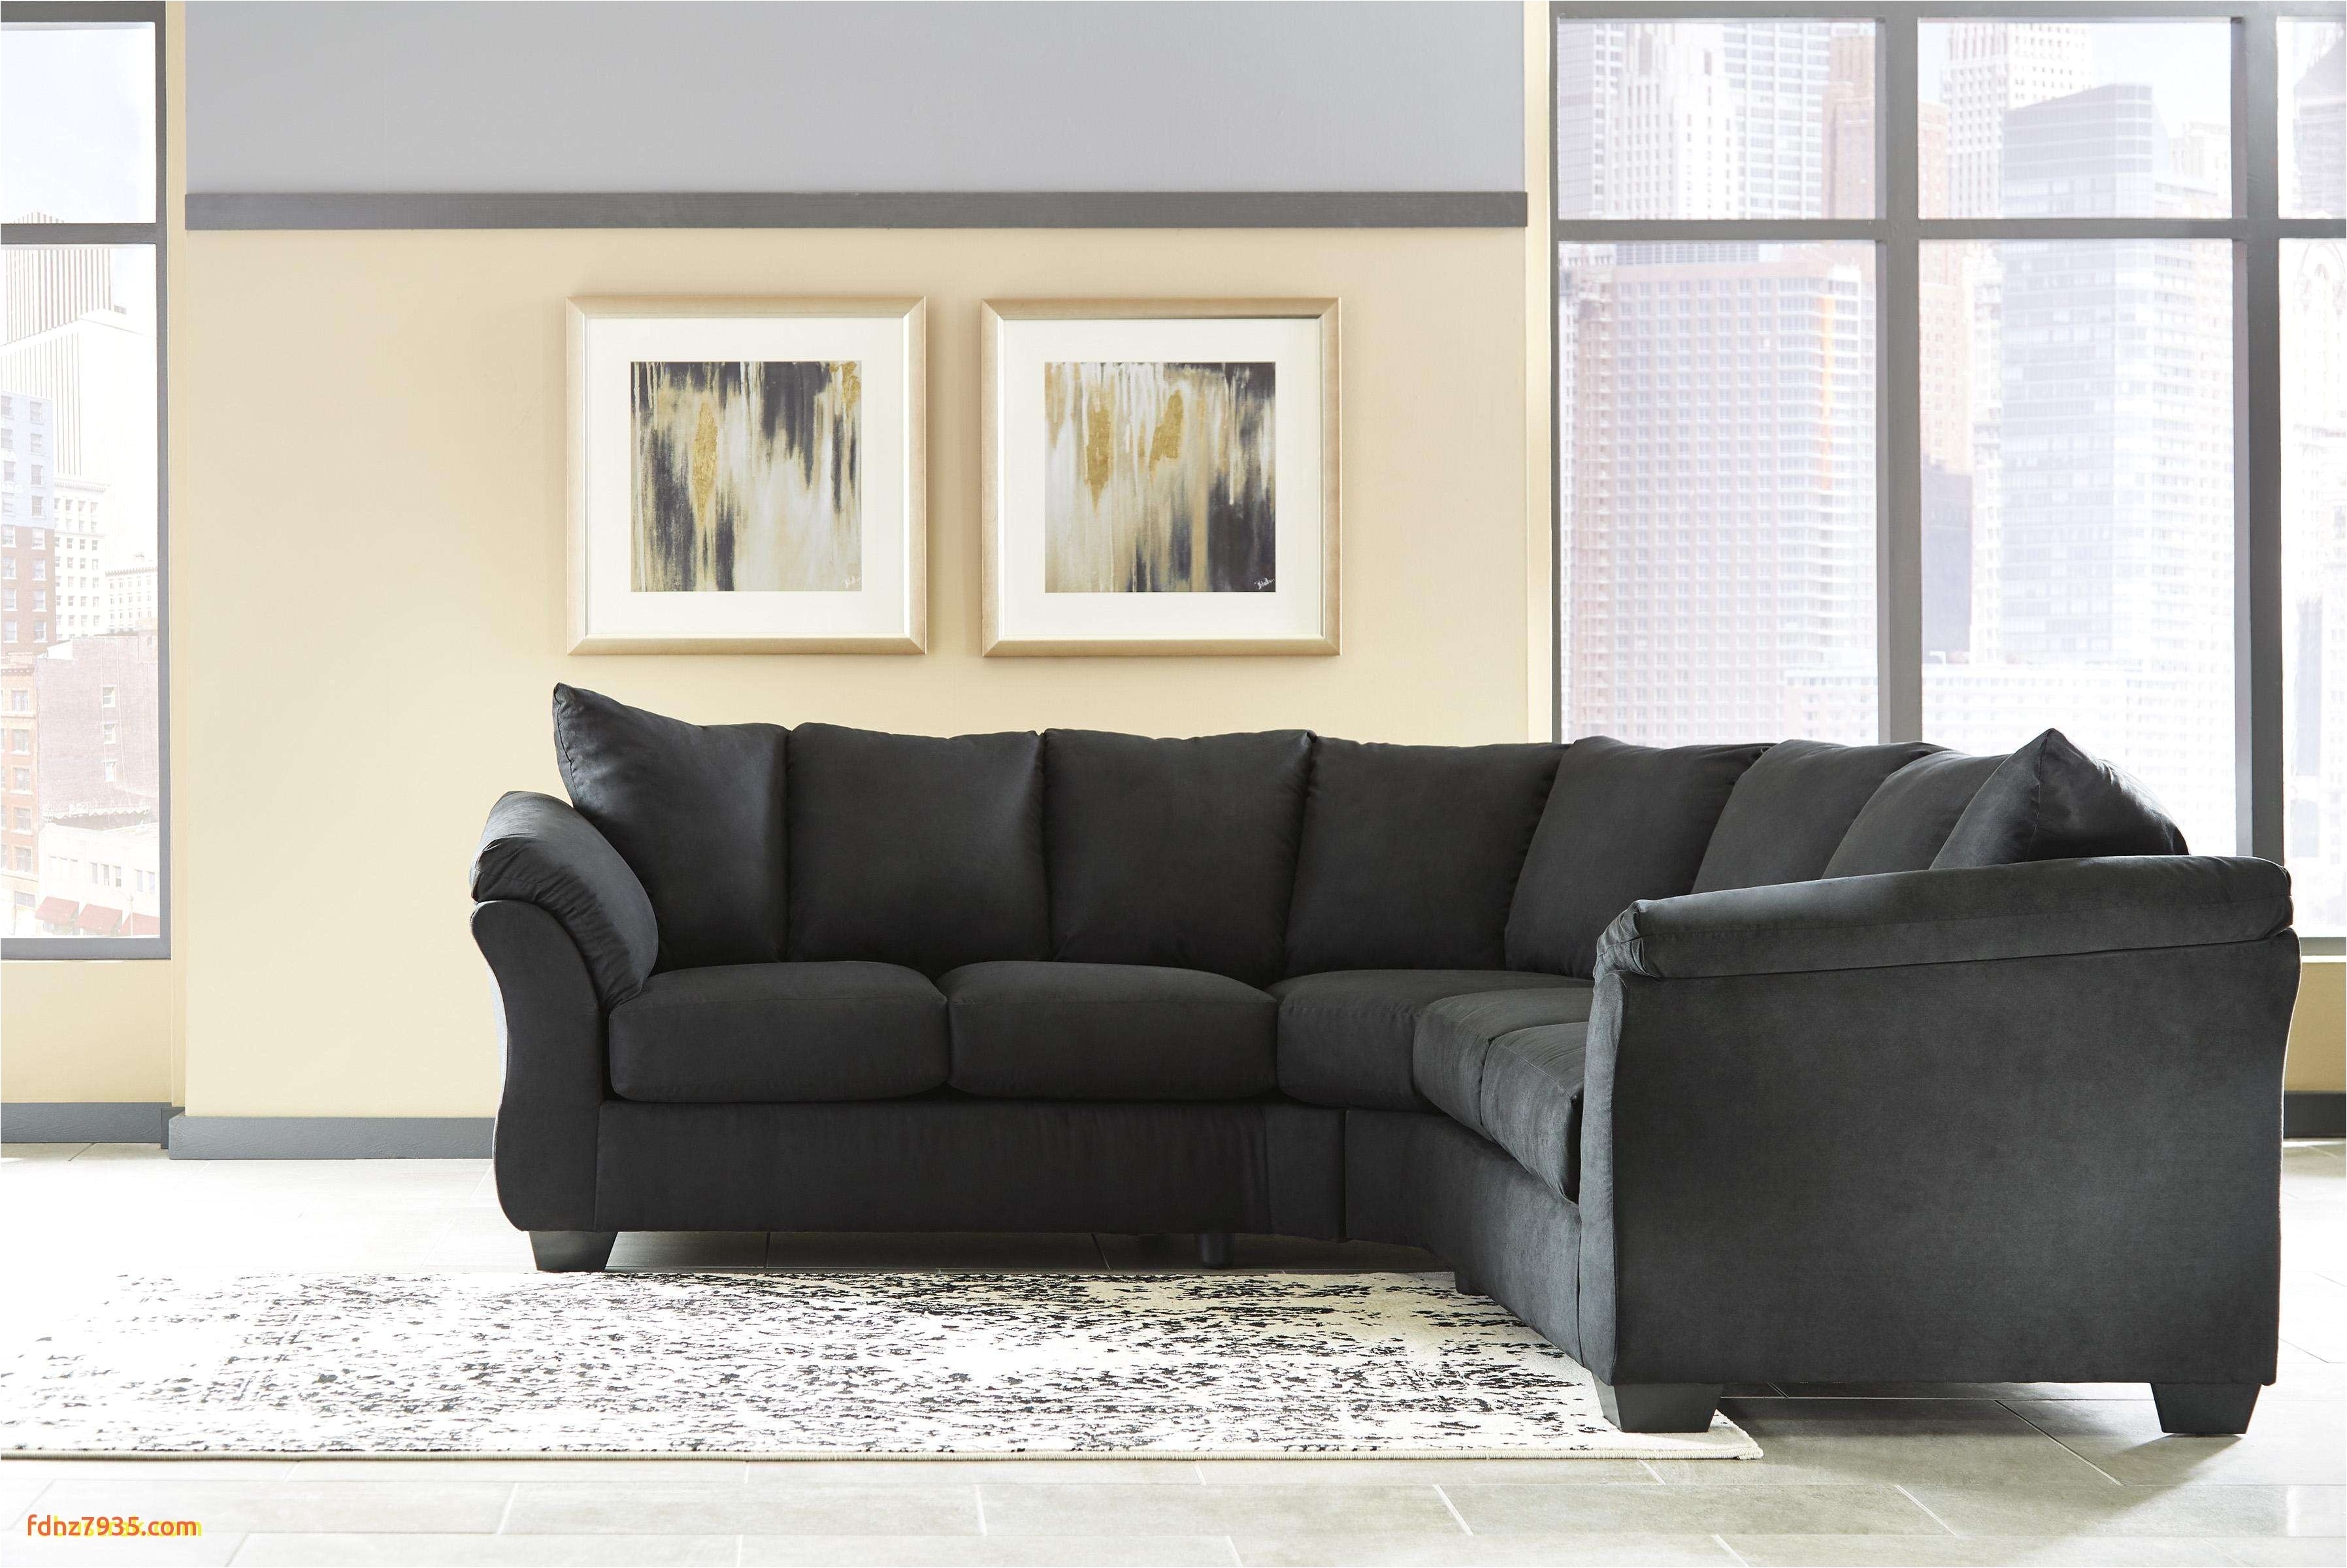 Living Room Ideas with Sectional sofas Luxury Sectional Couch 0d Tags Fabulous New Sectional Couch Magnificent Mid Century